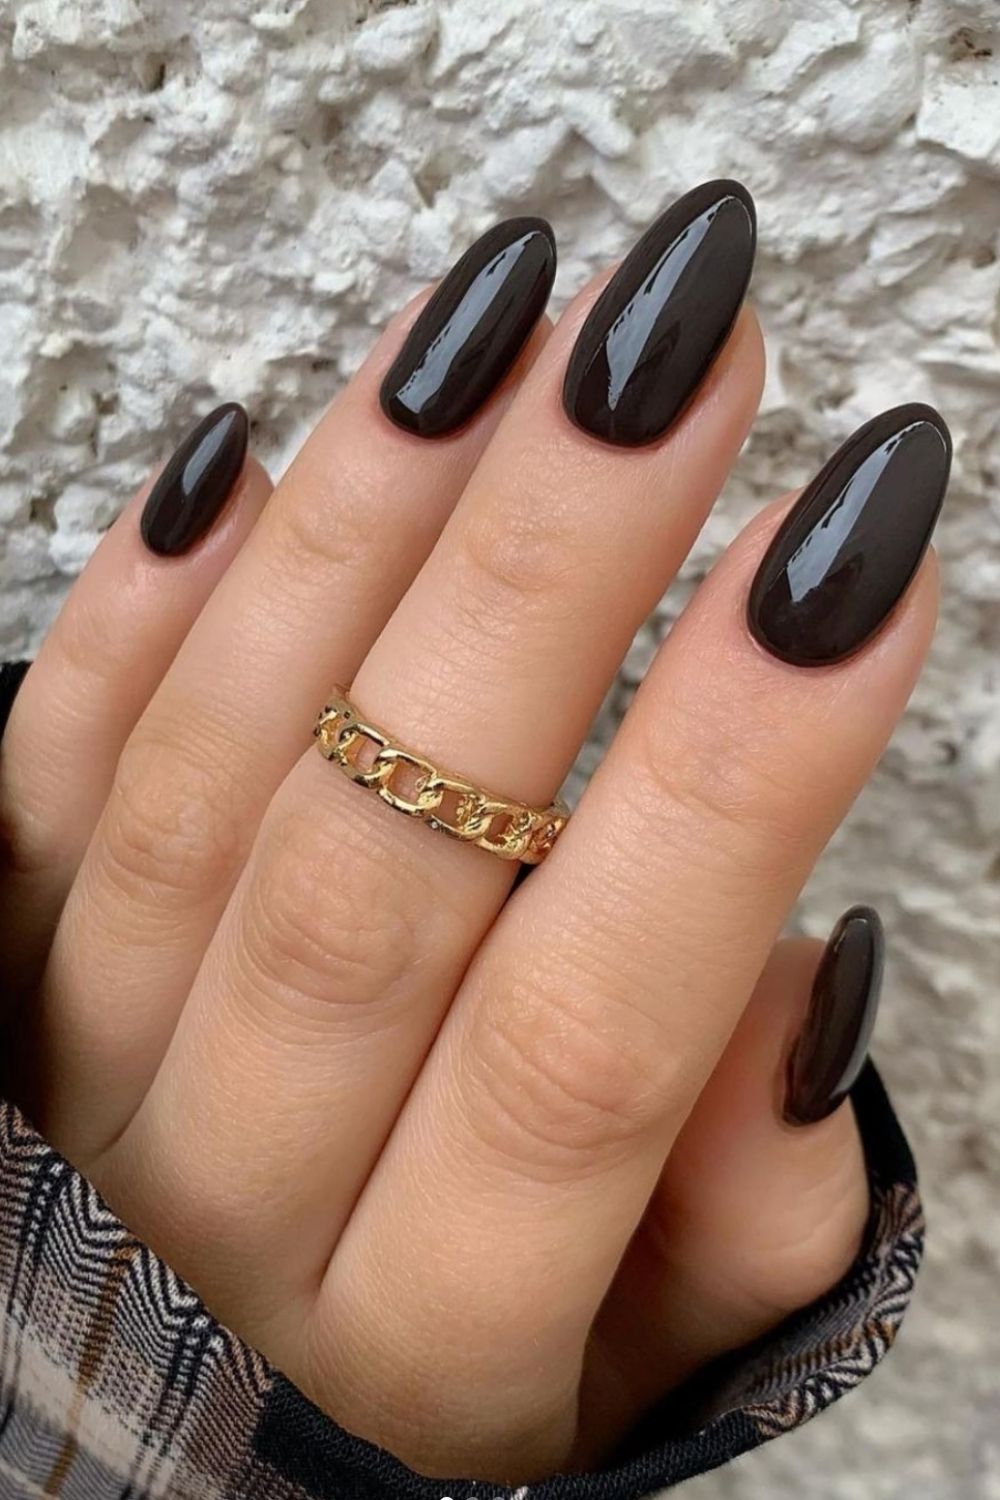 45 Top Homecoming nails with black nails 2021 to try